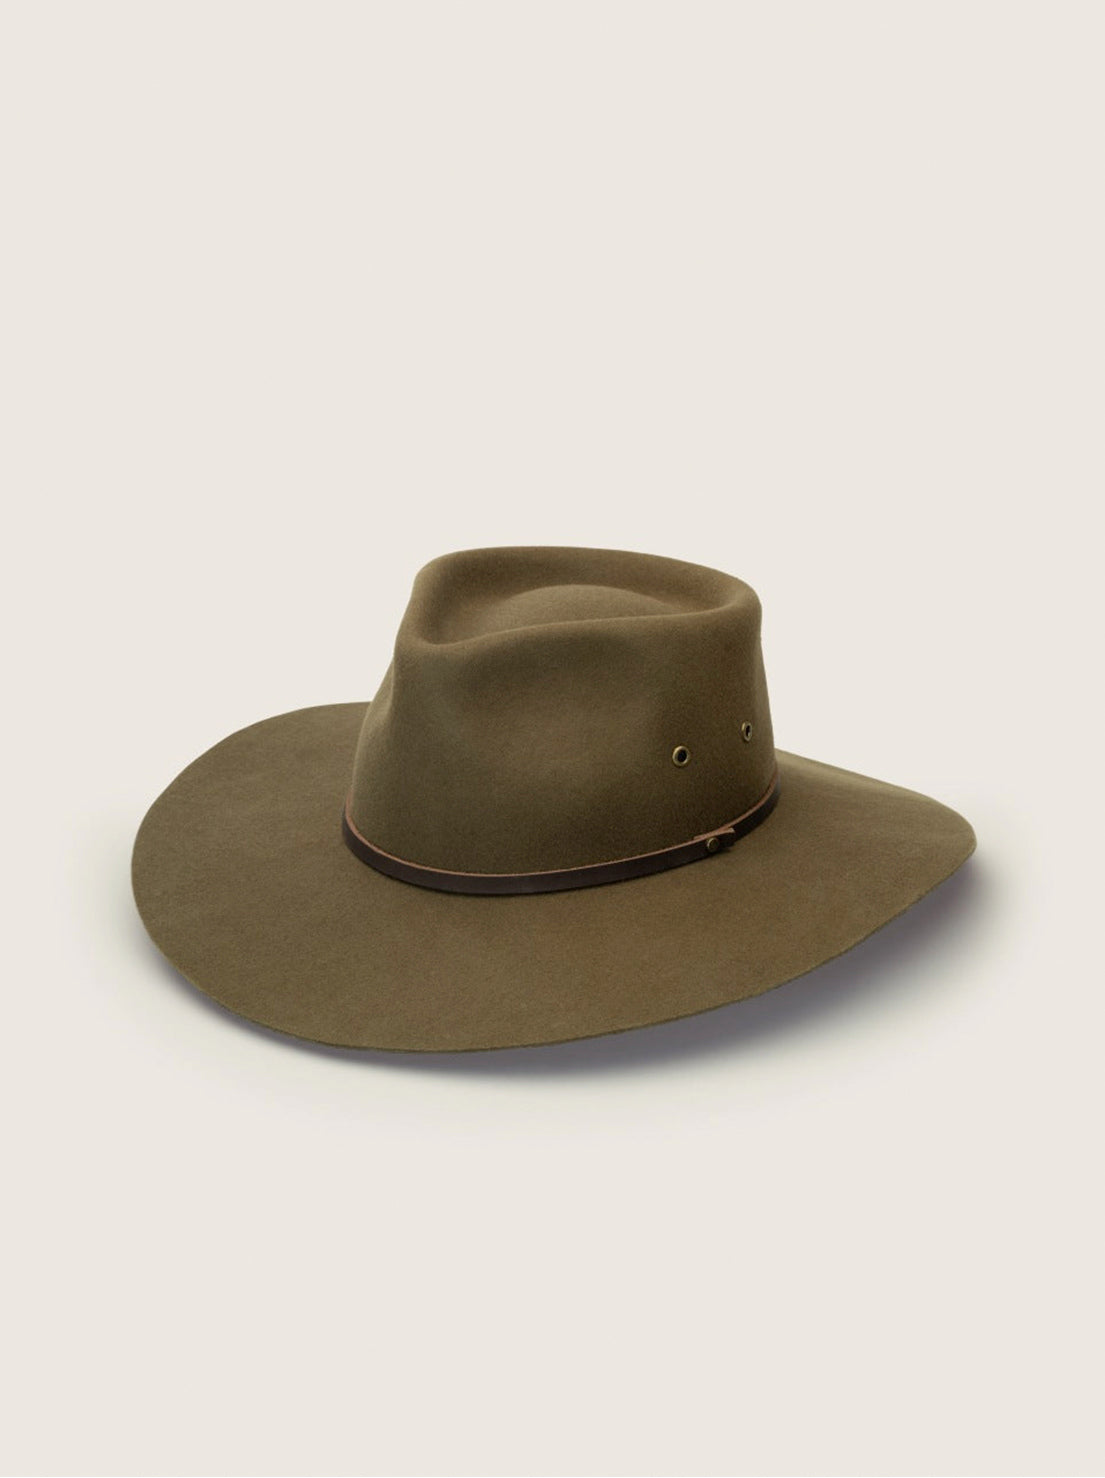 Will and Bear - Explorer Hat - Olive